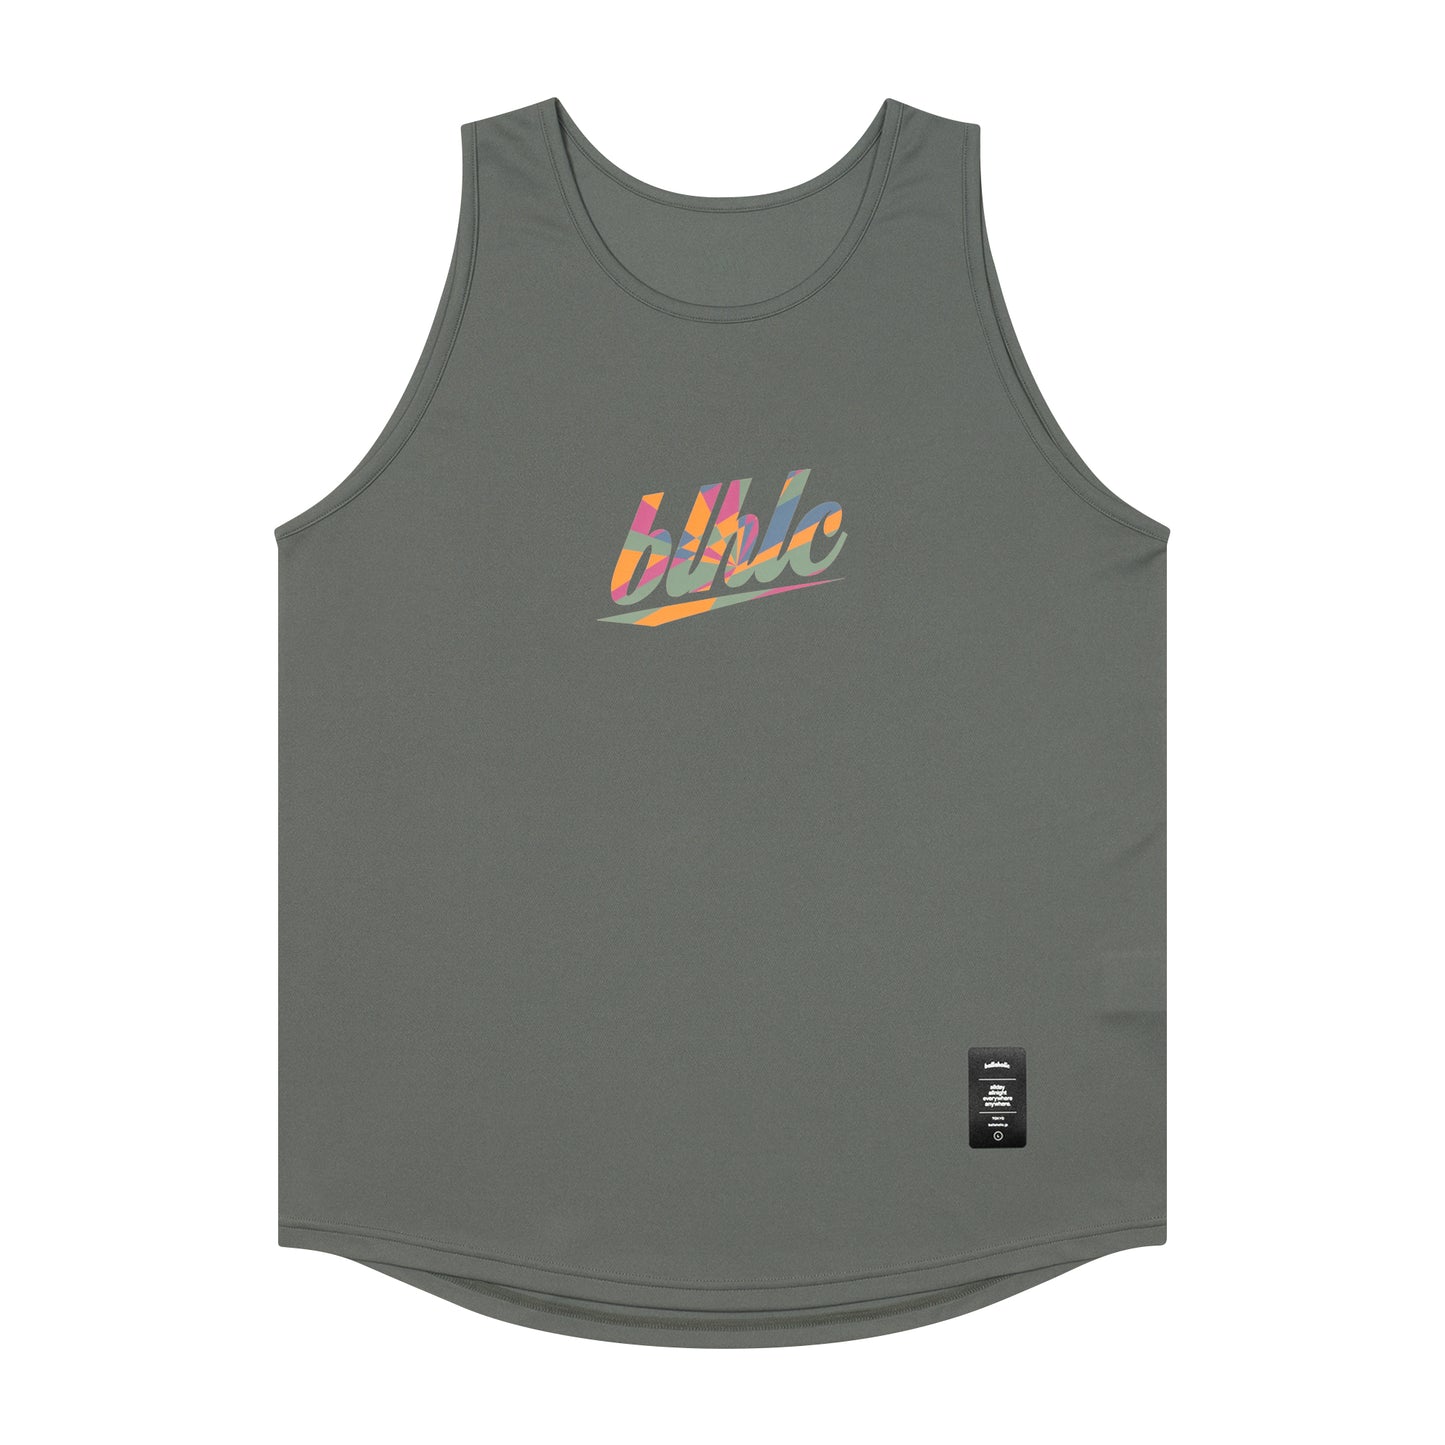 blhlc Tank Top (charcoal gray/south)